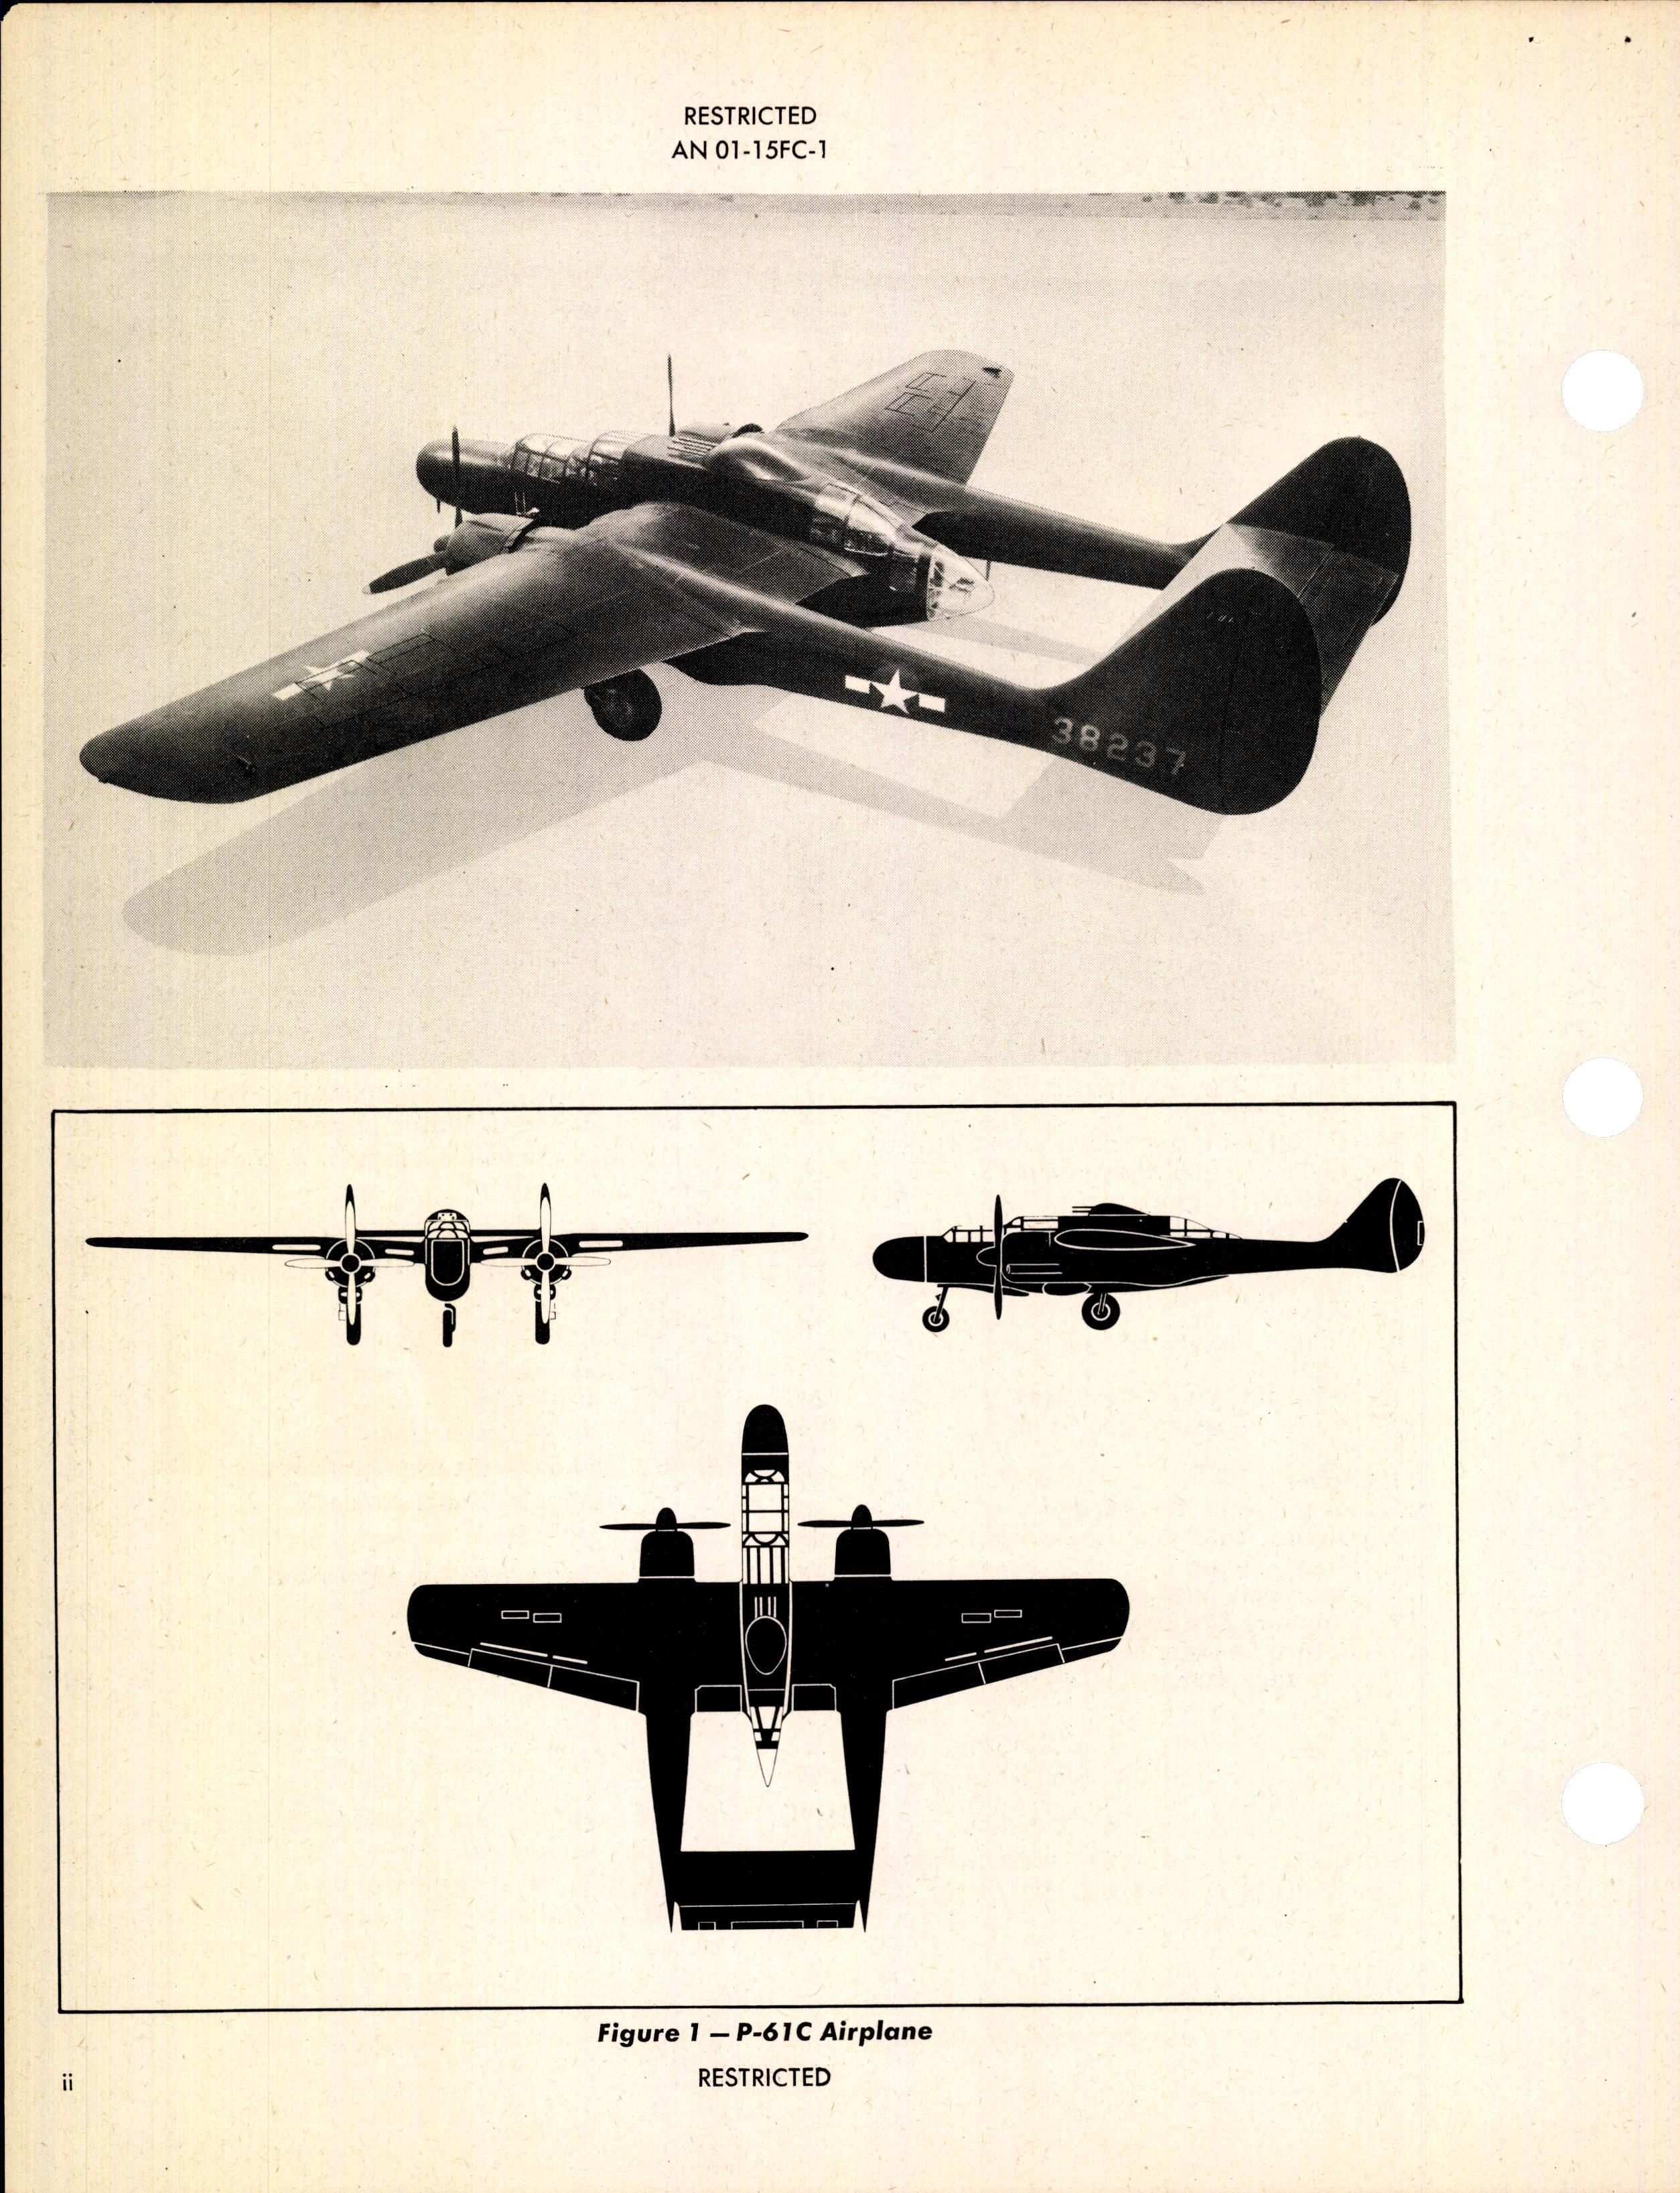 Sample page 4 from AirCorps Library document: Pilot's Flight Operating Instructions for P-61C Airplane